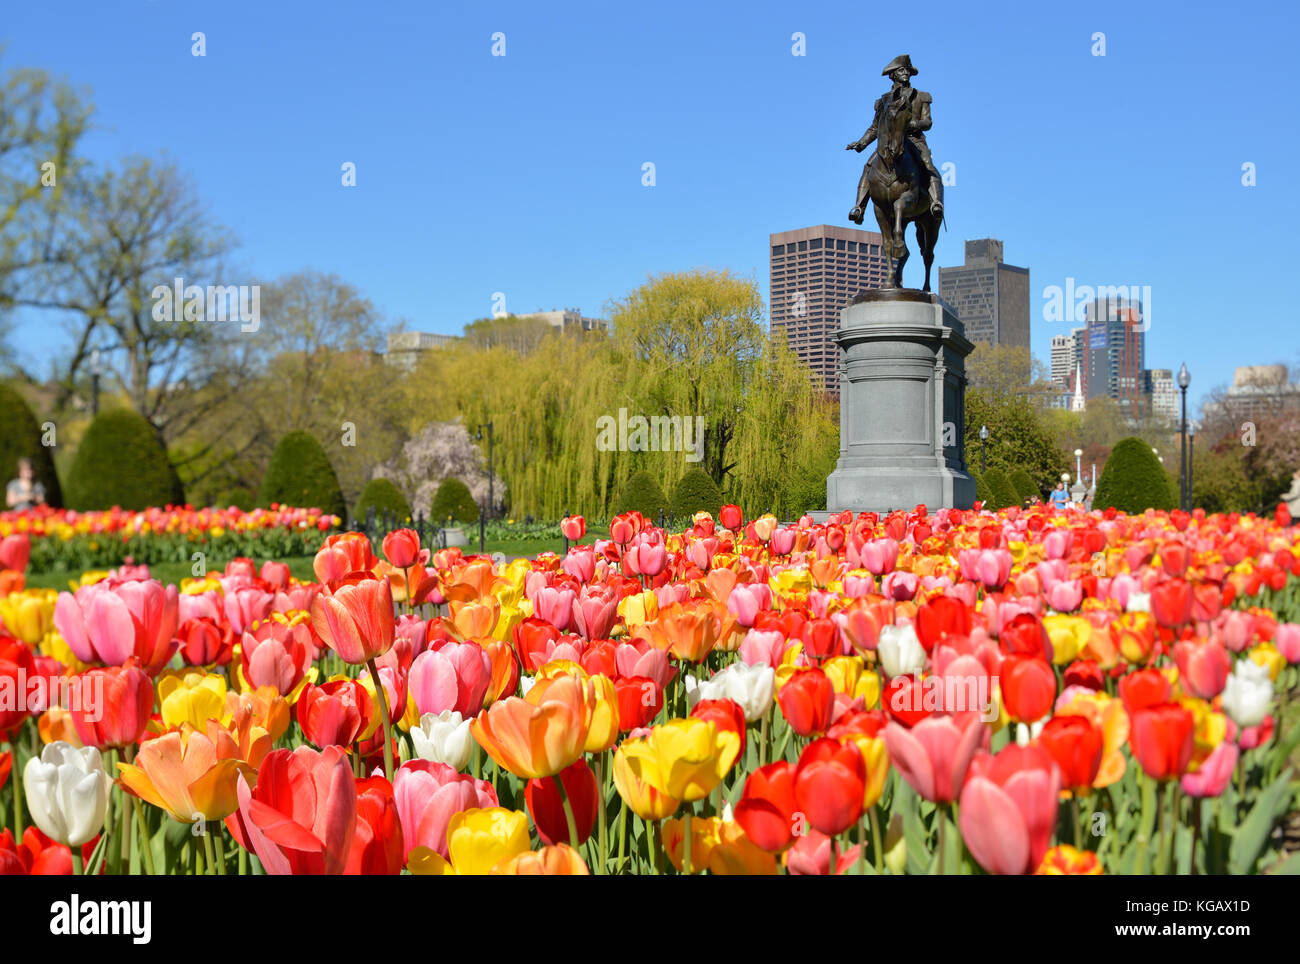 Boston Public Garden in the spring. Low angle view of George Washington statue framed by colorful tulips. Willows and city skyline in the background. Stock Photo